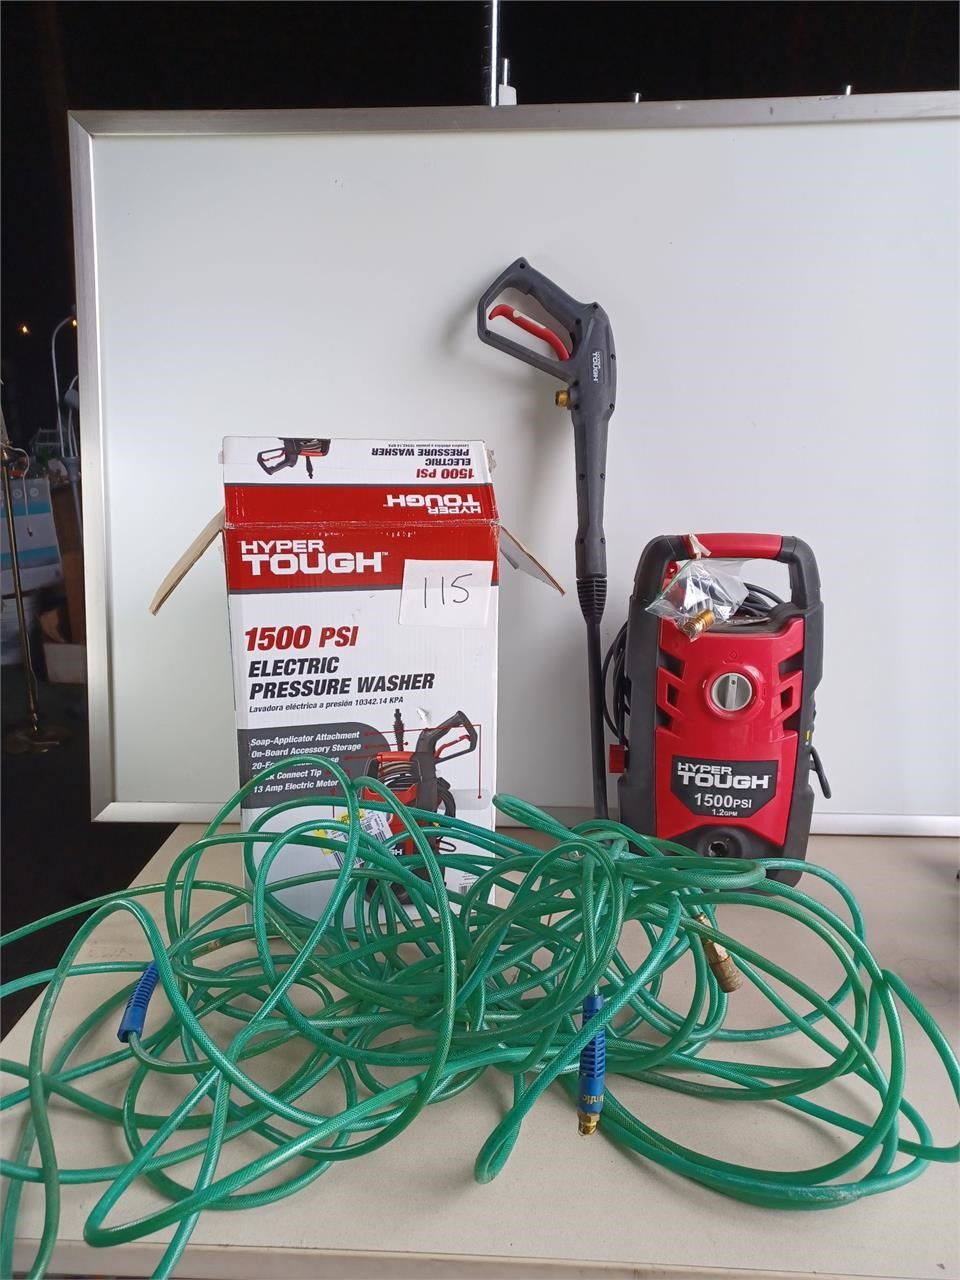 HYPER TOUGH 1500 PSI ELECTRIC POWER WASHER